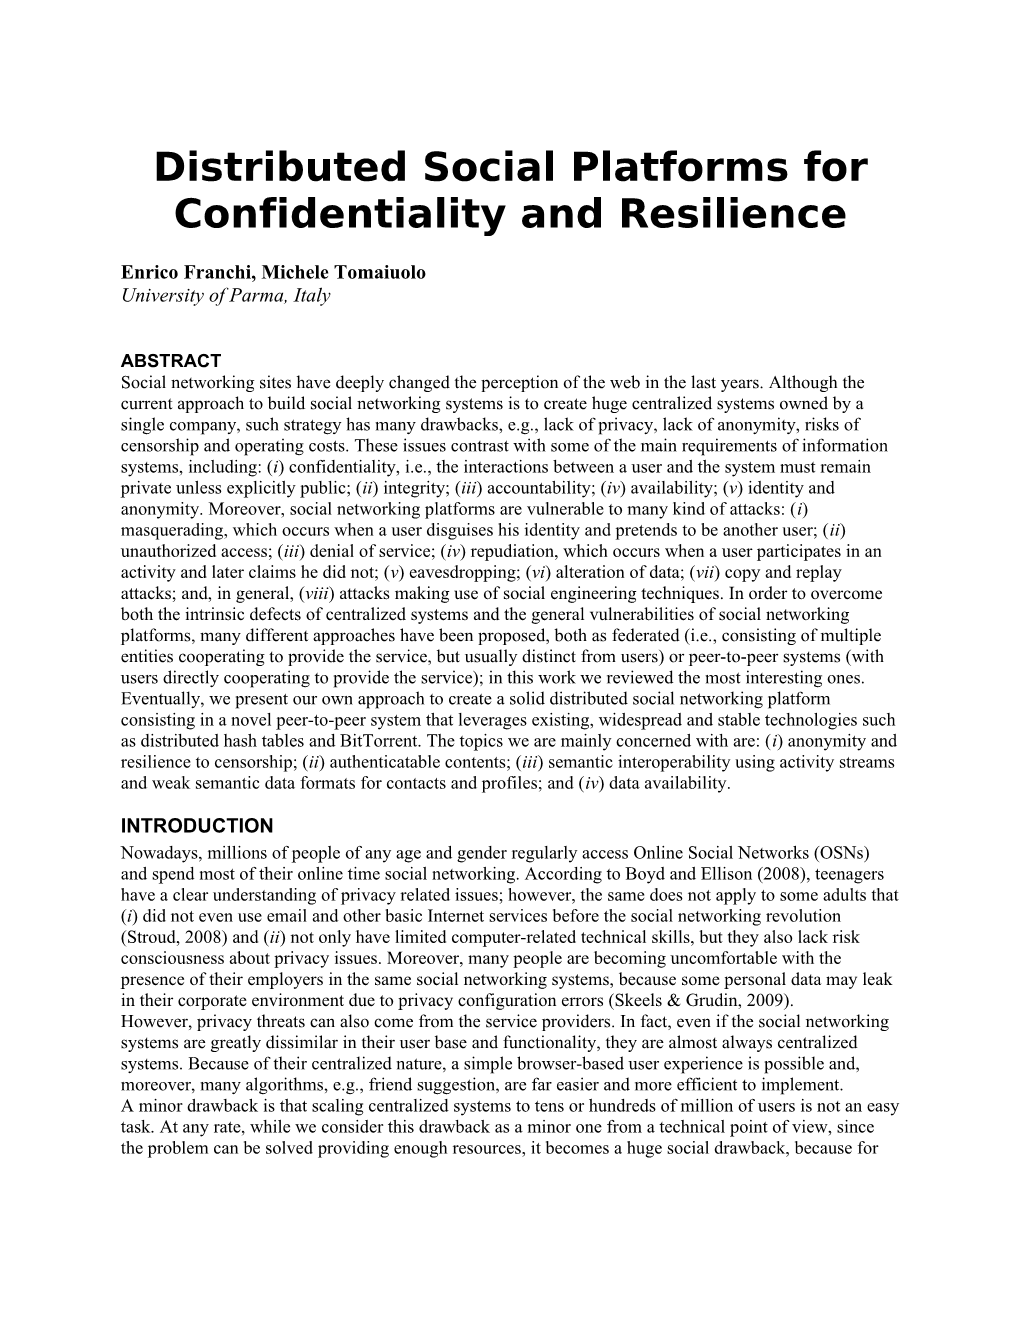 Distributed Social Platforms for Confidentiality and Resilience